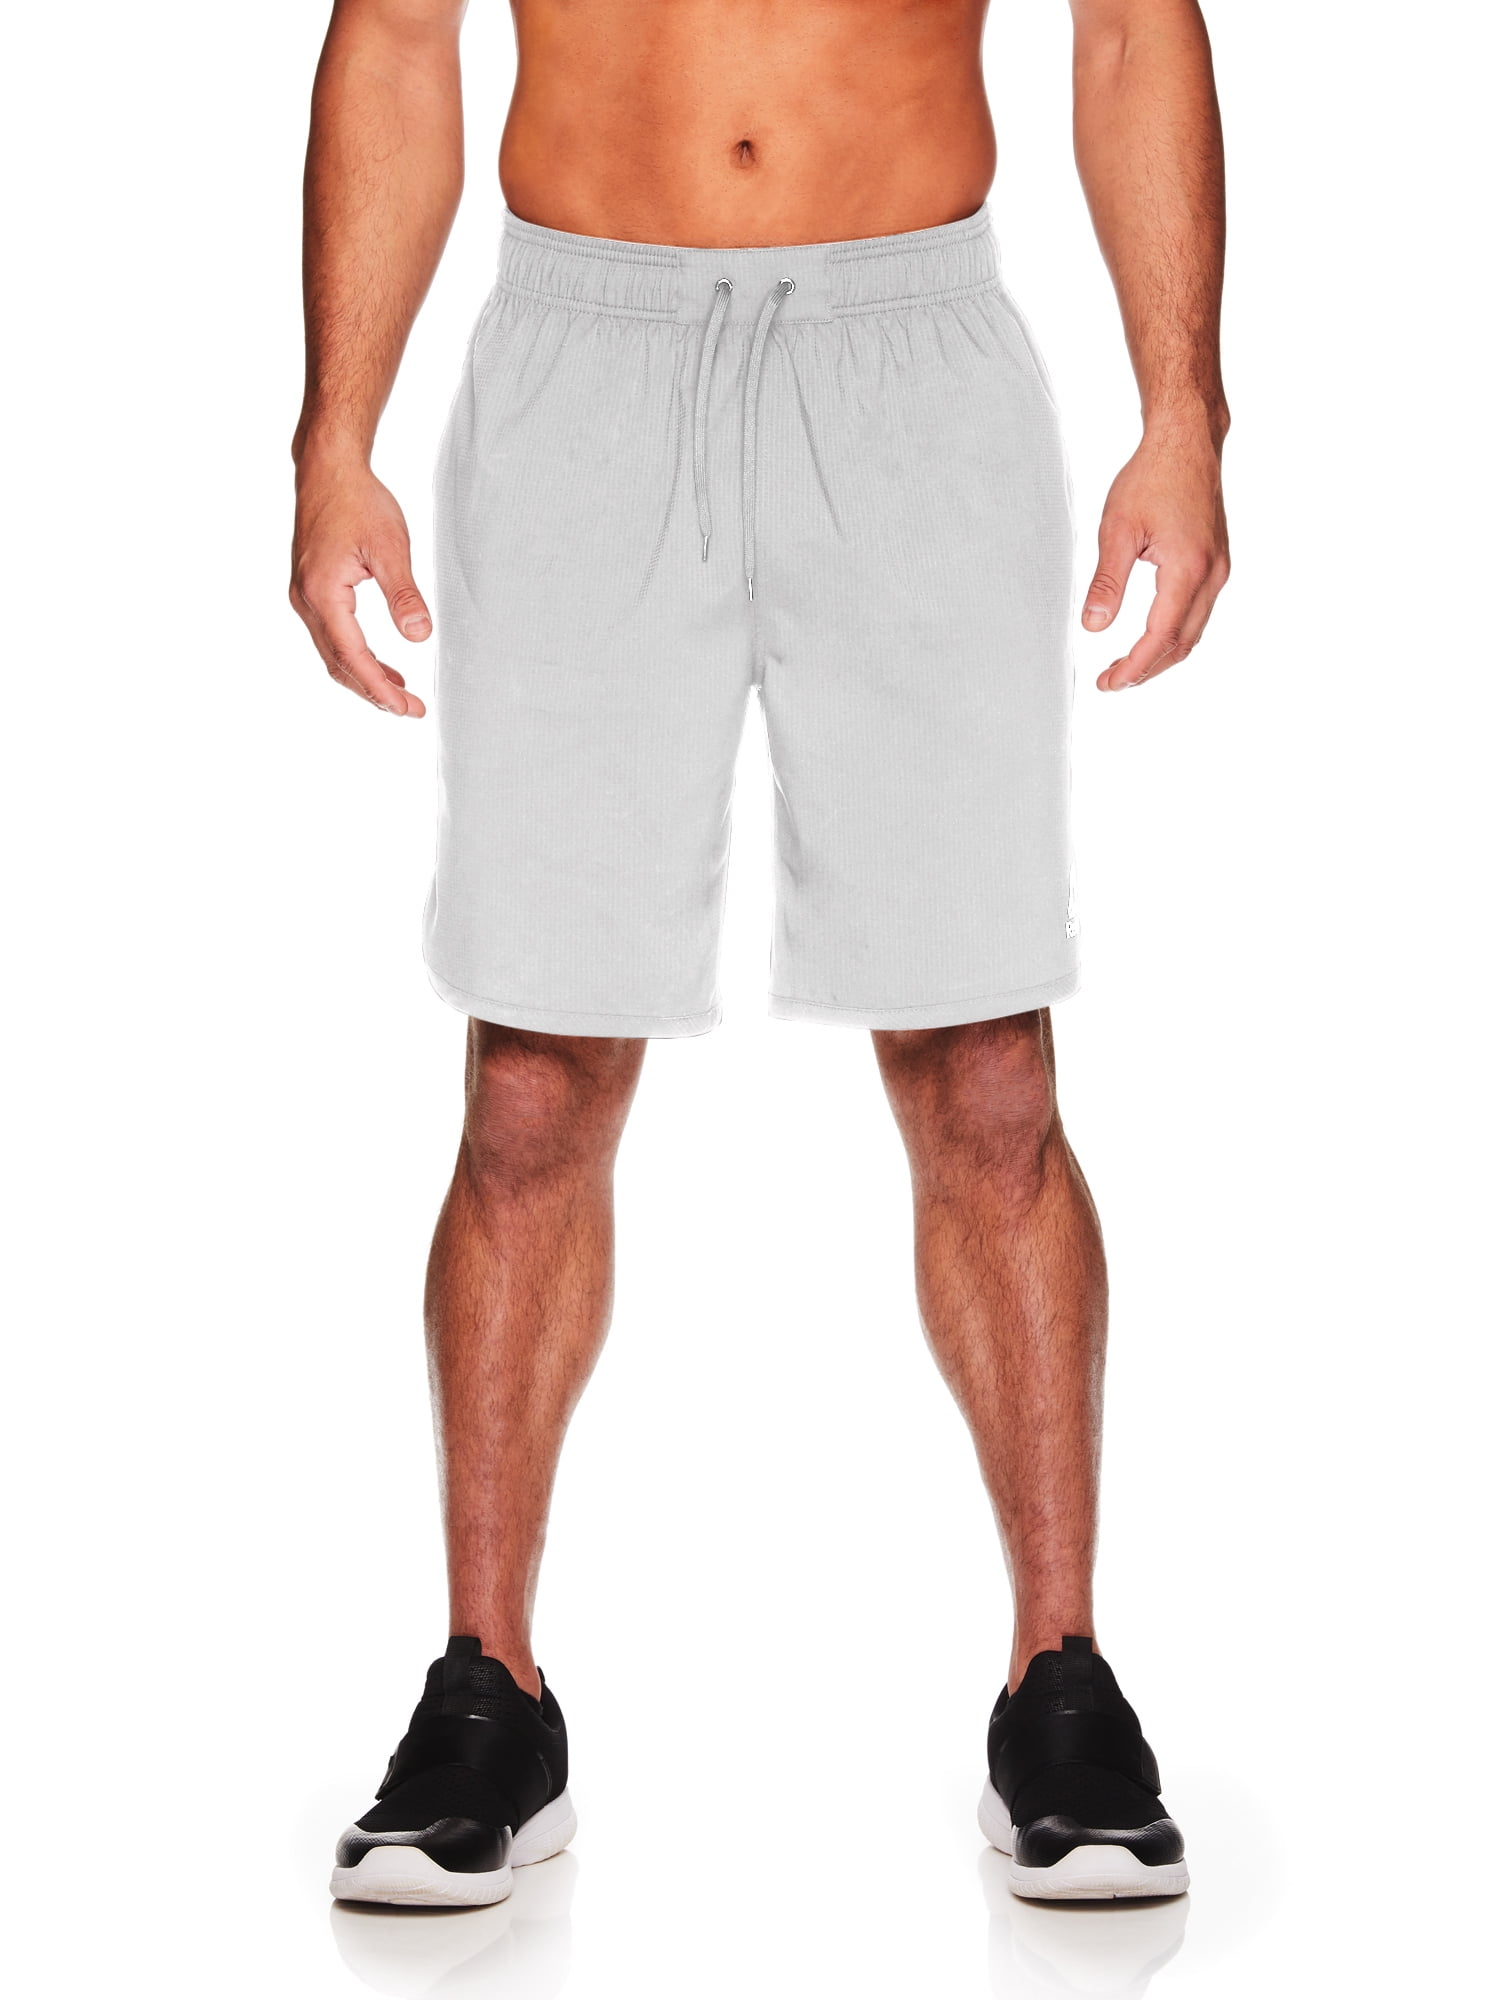 Reebok® Men's Two-Tone Athletic Performance Dazzle Shorts with Pockets  (2-Pack) - Coupon Codes, Promo Codes, Daily Deals, Save Money Today